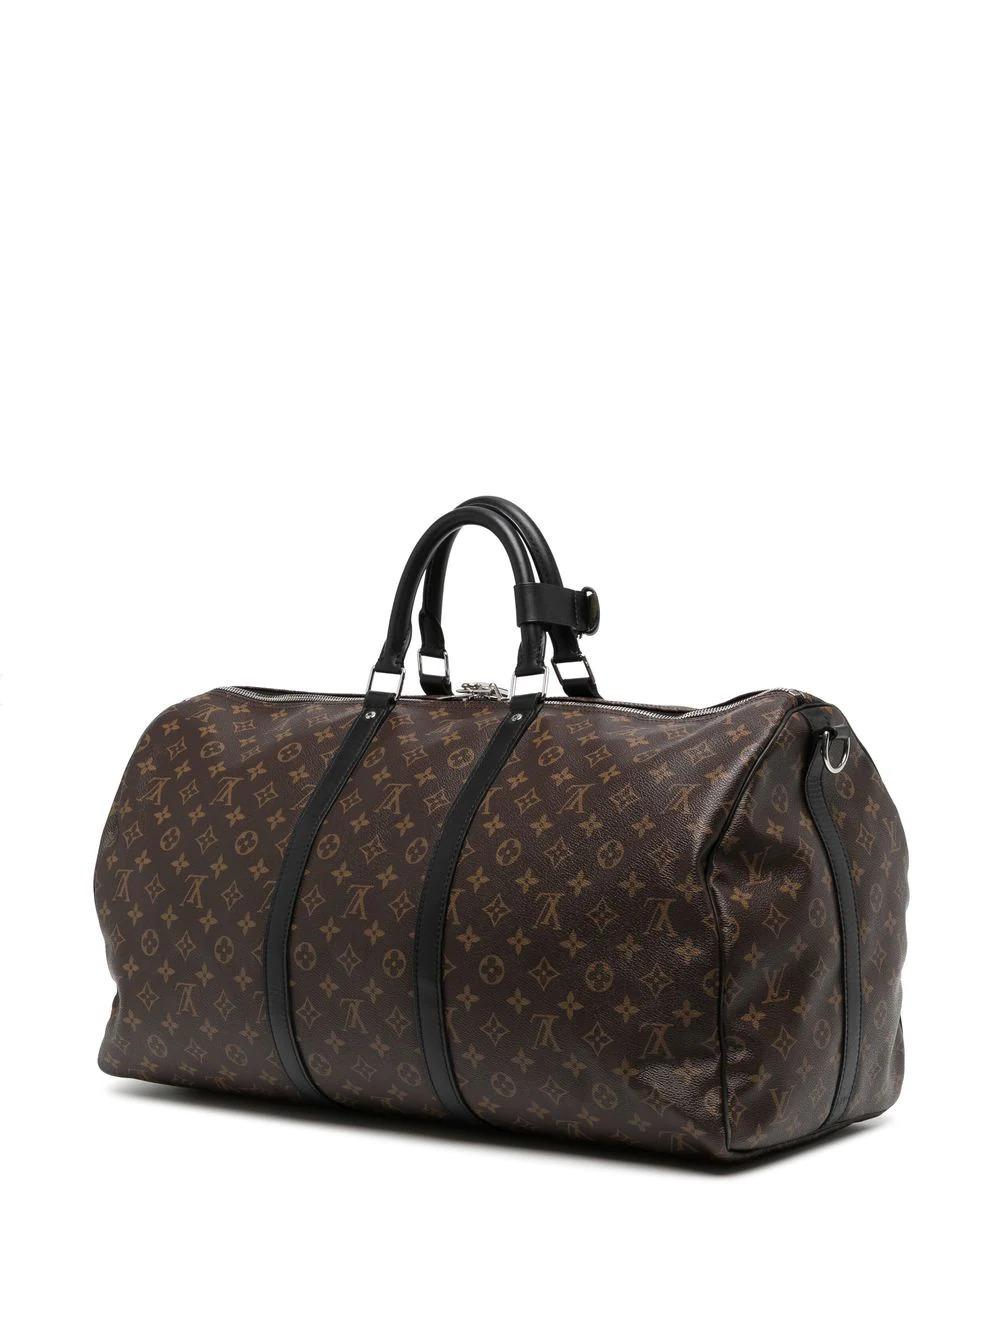 This Louis Vuitton Keepall 55 from 2019 is the perfect travel companion, made from Louis Vuitton canvas and black cowhide leather trimmings. Its large size means there's lots of space for clothes and accessories. Carry it by the rolled top handles